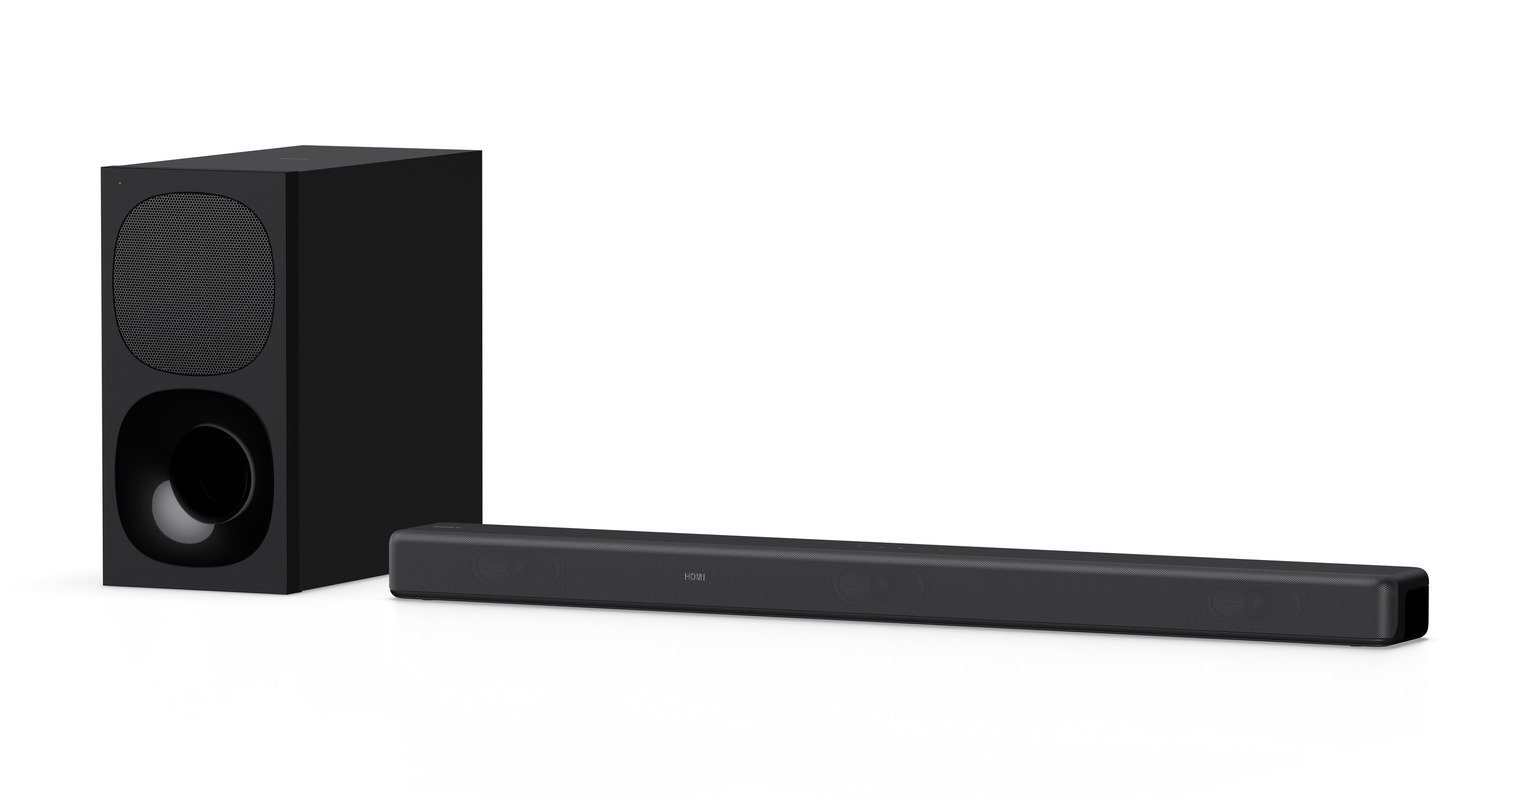 Sony HT-G700 3.1Ch Sound Bar with Subwoofer Review